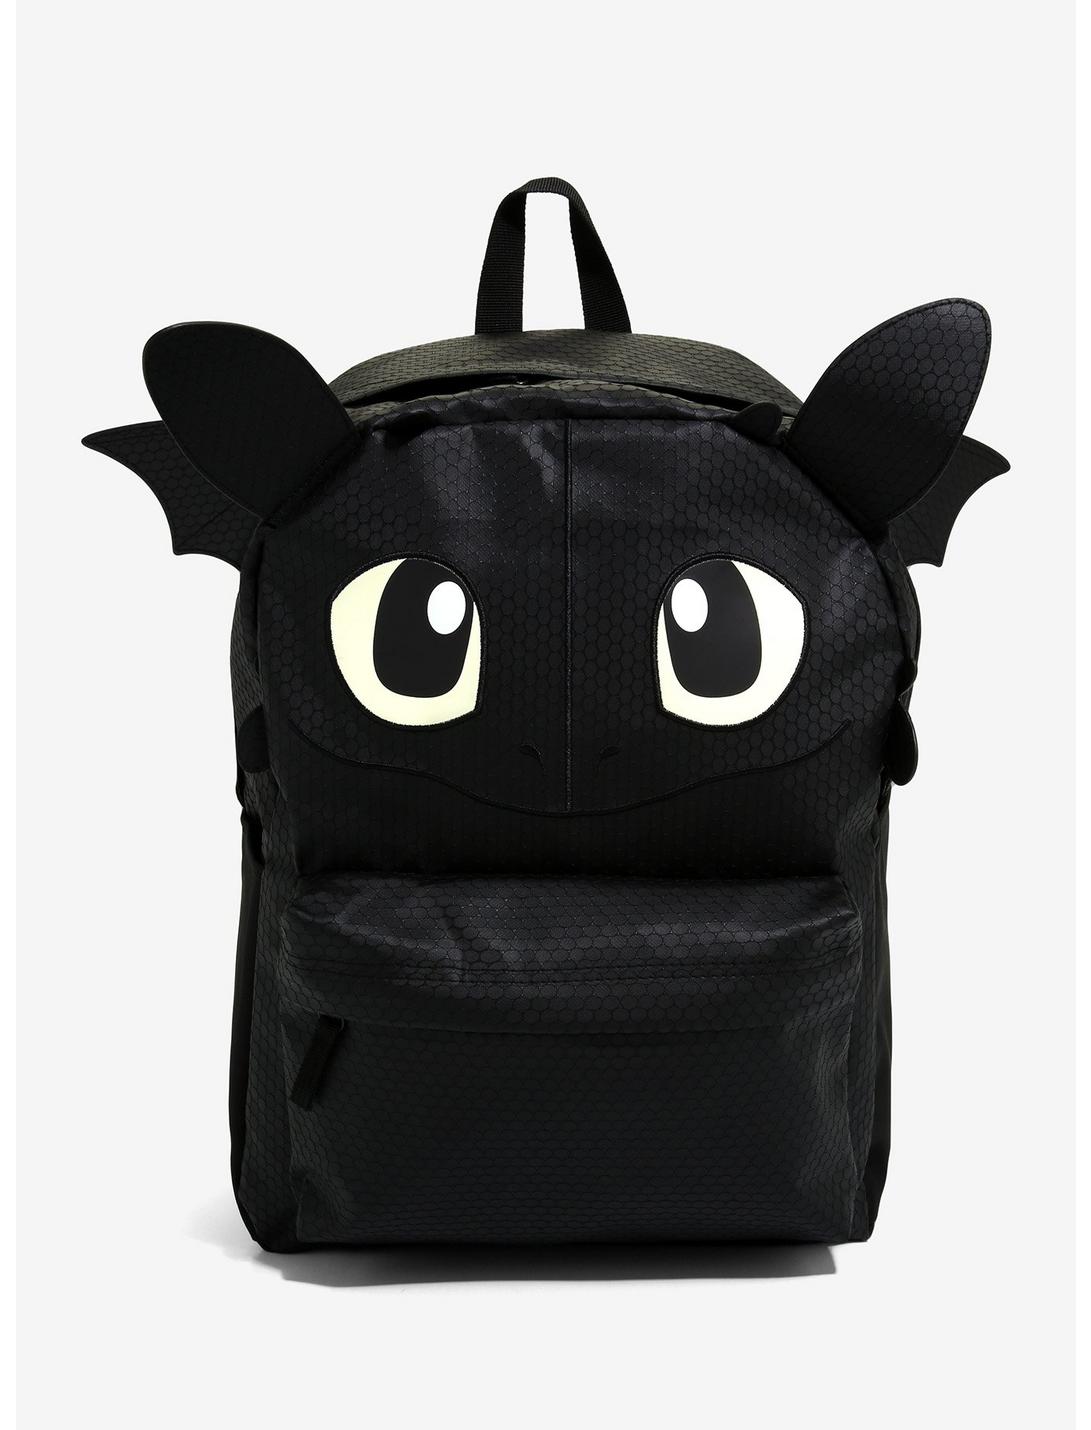 How To Train Your Dragon Toothless Backpack, , hi-res